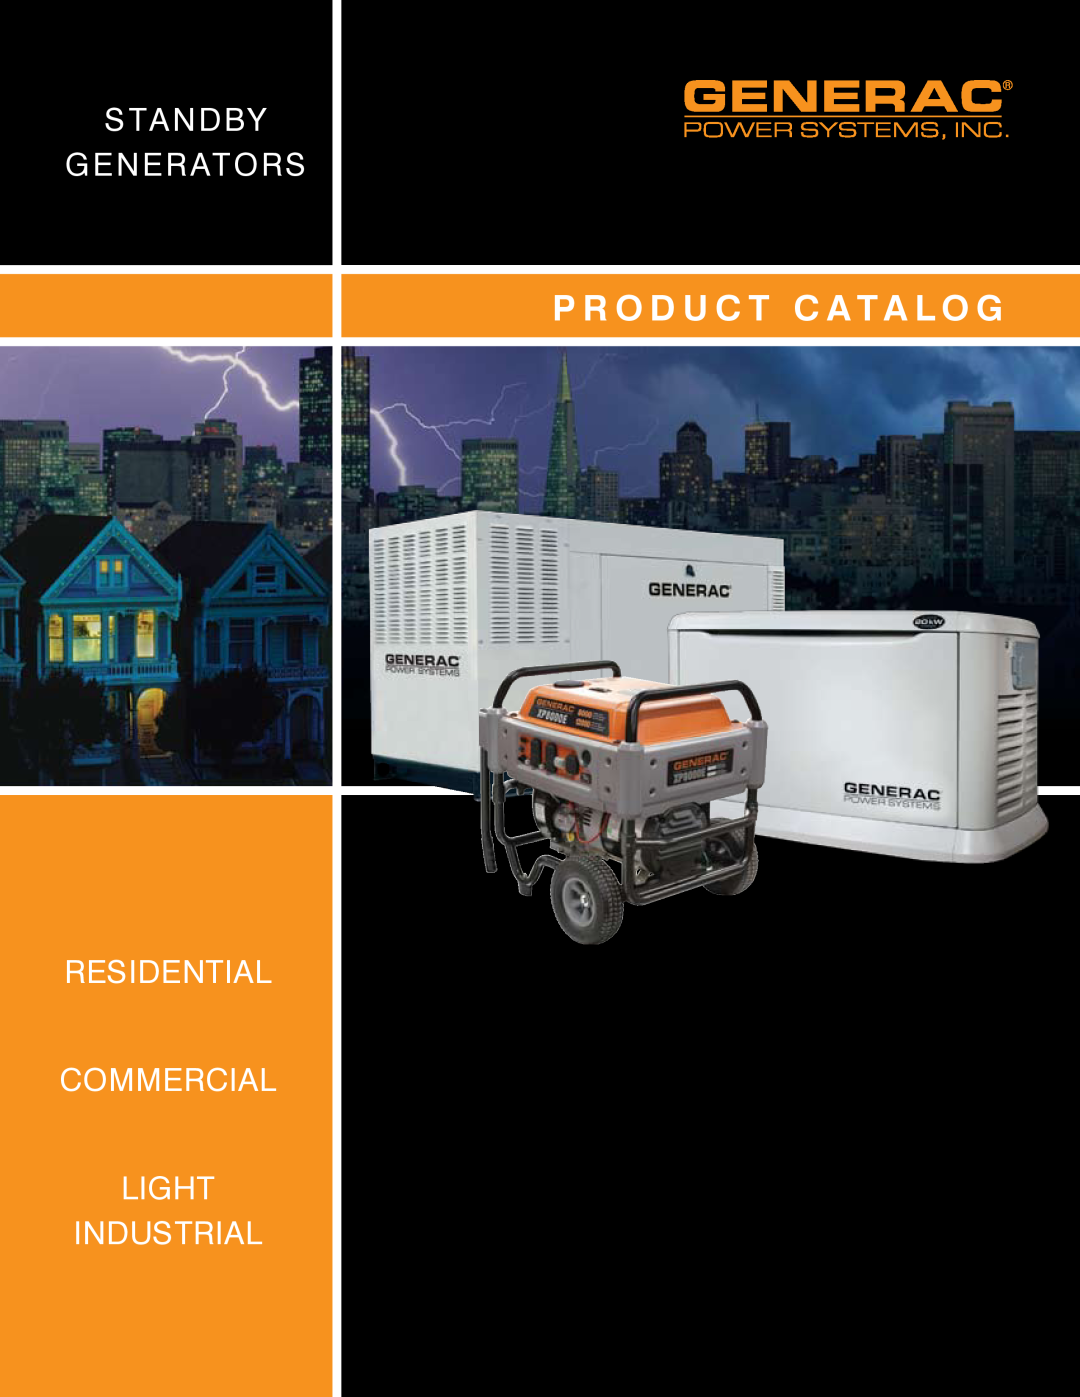 Generac Power Systems Transfer Switches and Accessories manual standby generators, residential Commercial light 